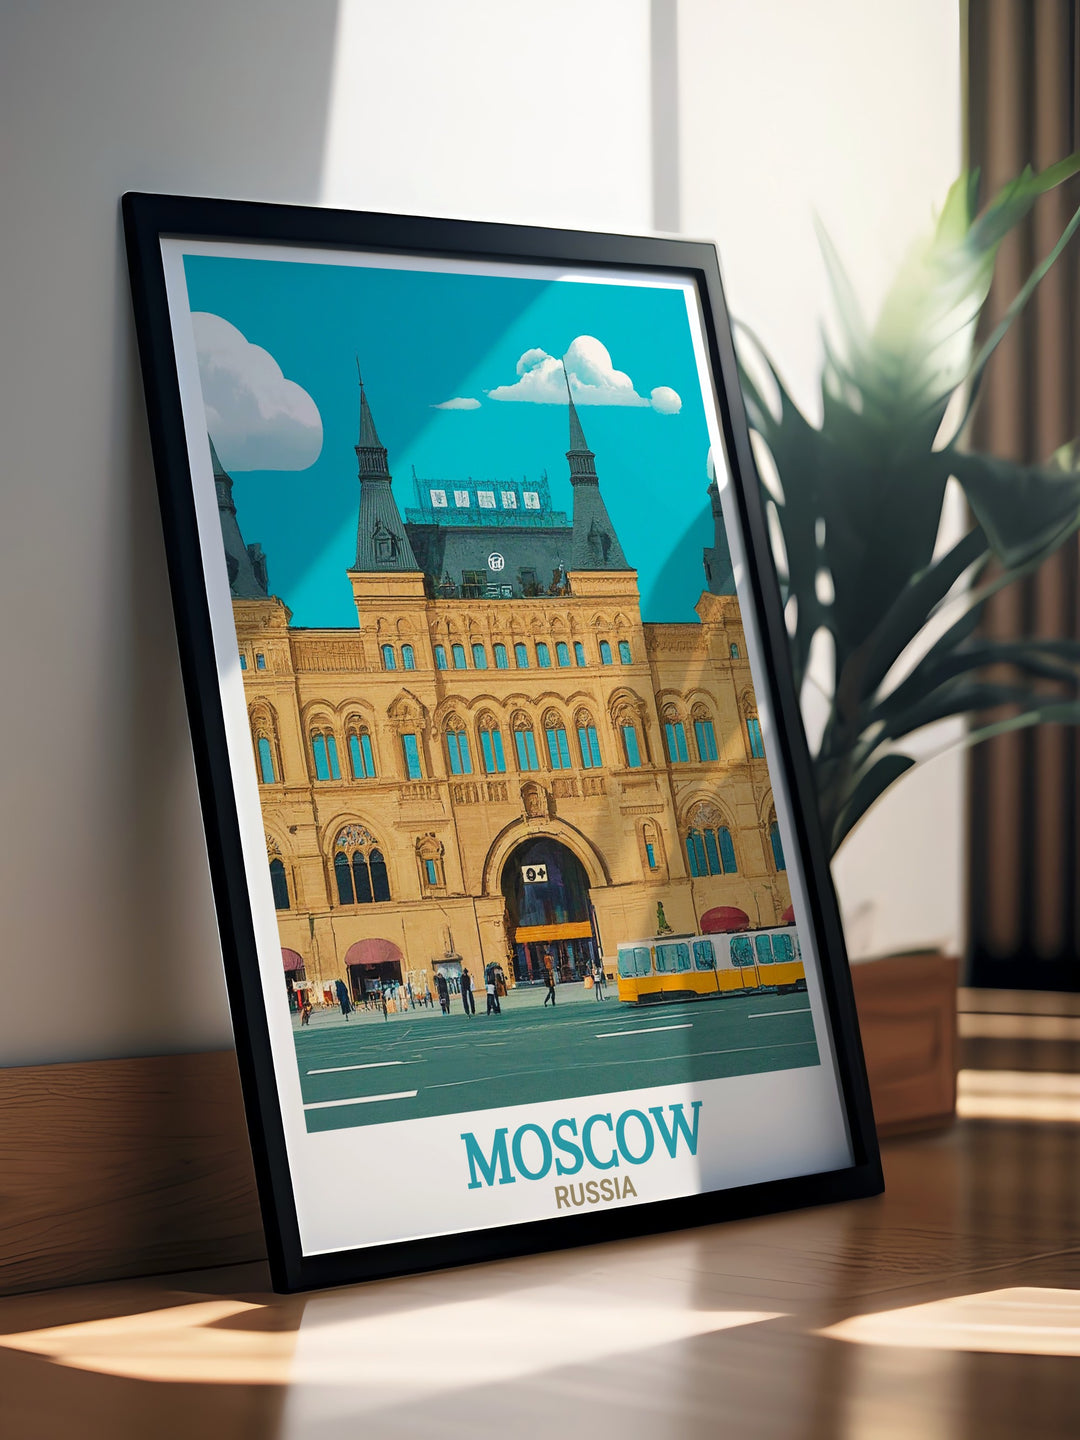 Elegant Moscow print featuring the GUM Department Store a captivating piece of Russia art that transforms your space with timeless beauty and detailed design suitable for various interior styles.